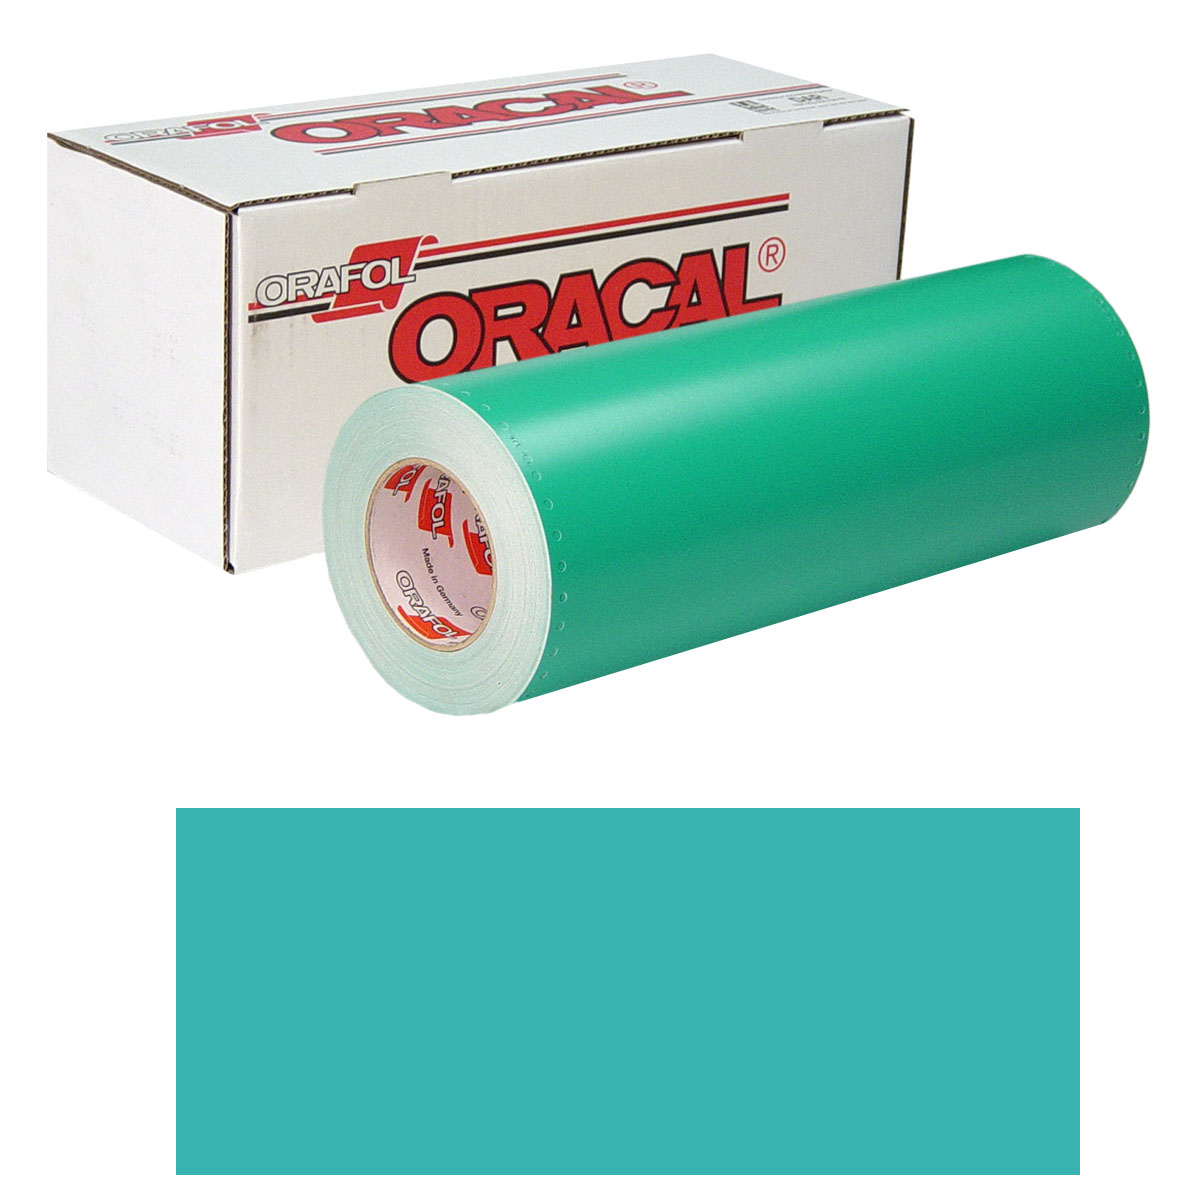 ORACAL 8500 30in X 10yd 054 Turquoise